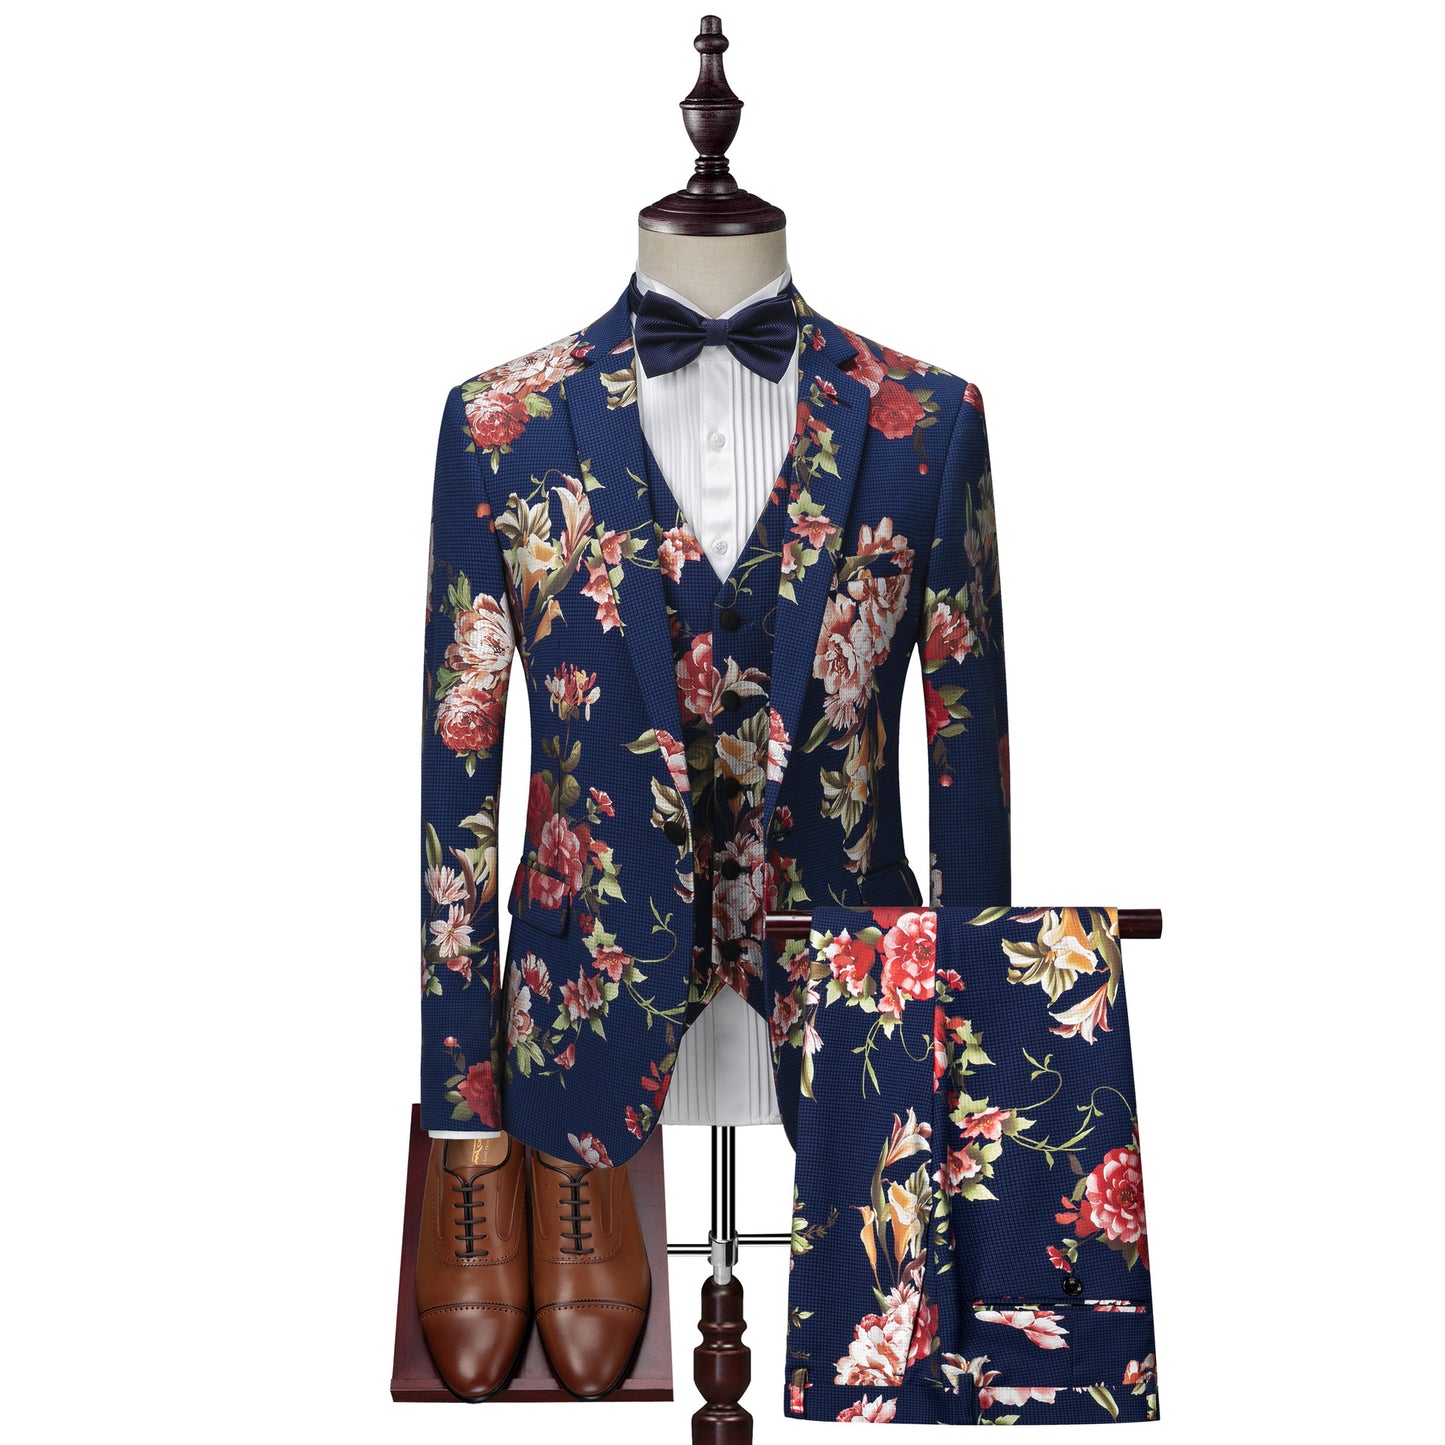 Men's printed dress suit three-piece suit for annual meeting performance